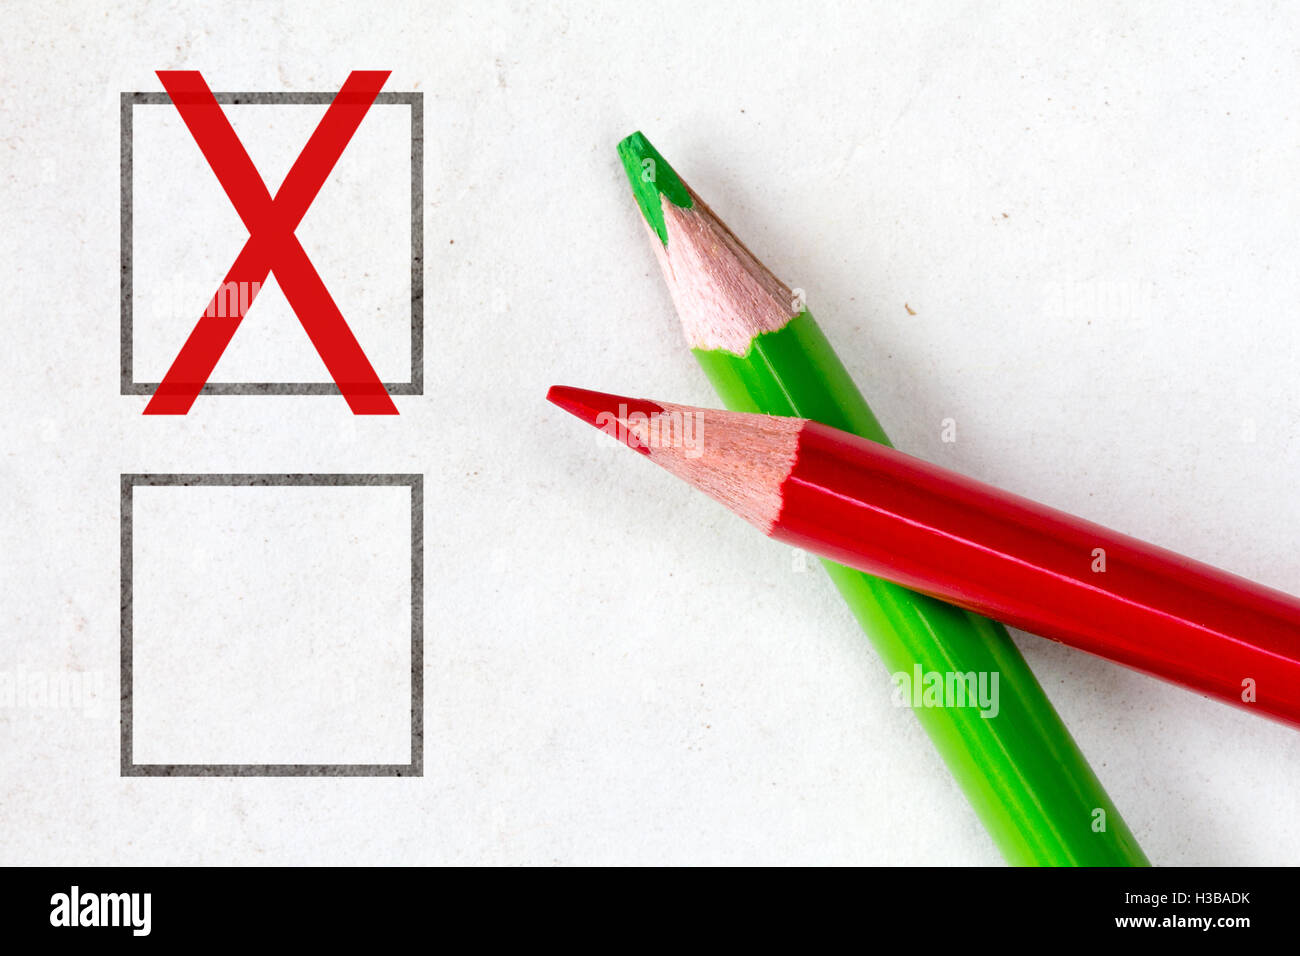 Red and green pencils with marking checkbox. Concept for customer satisfaction survey,education research or election Stock Photo